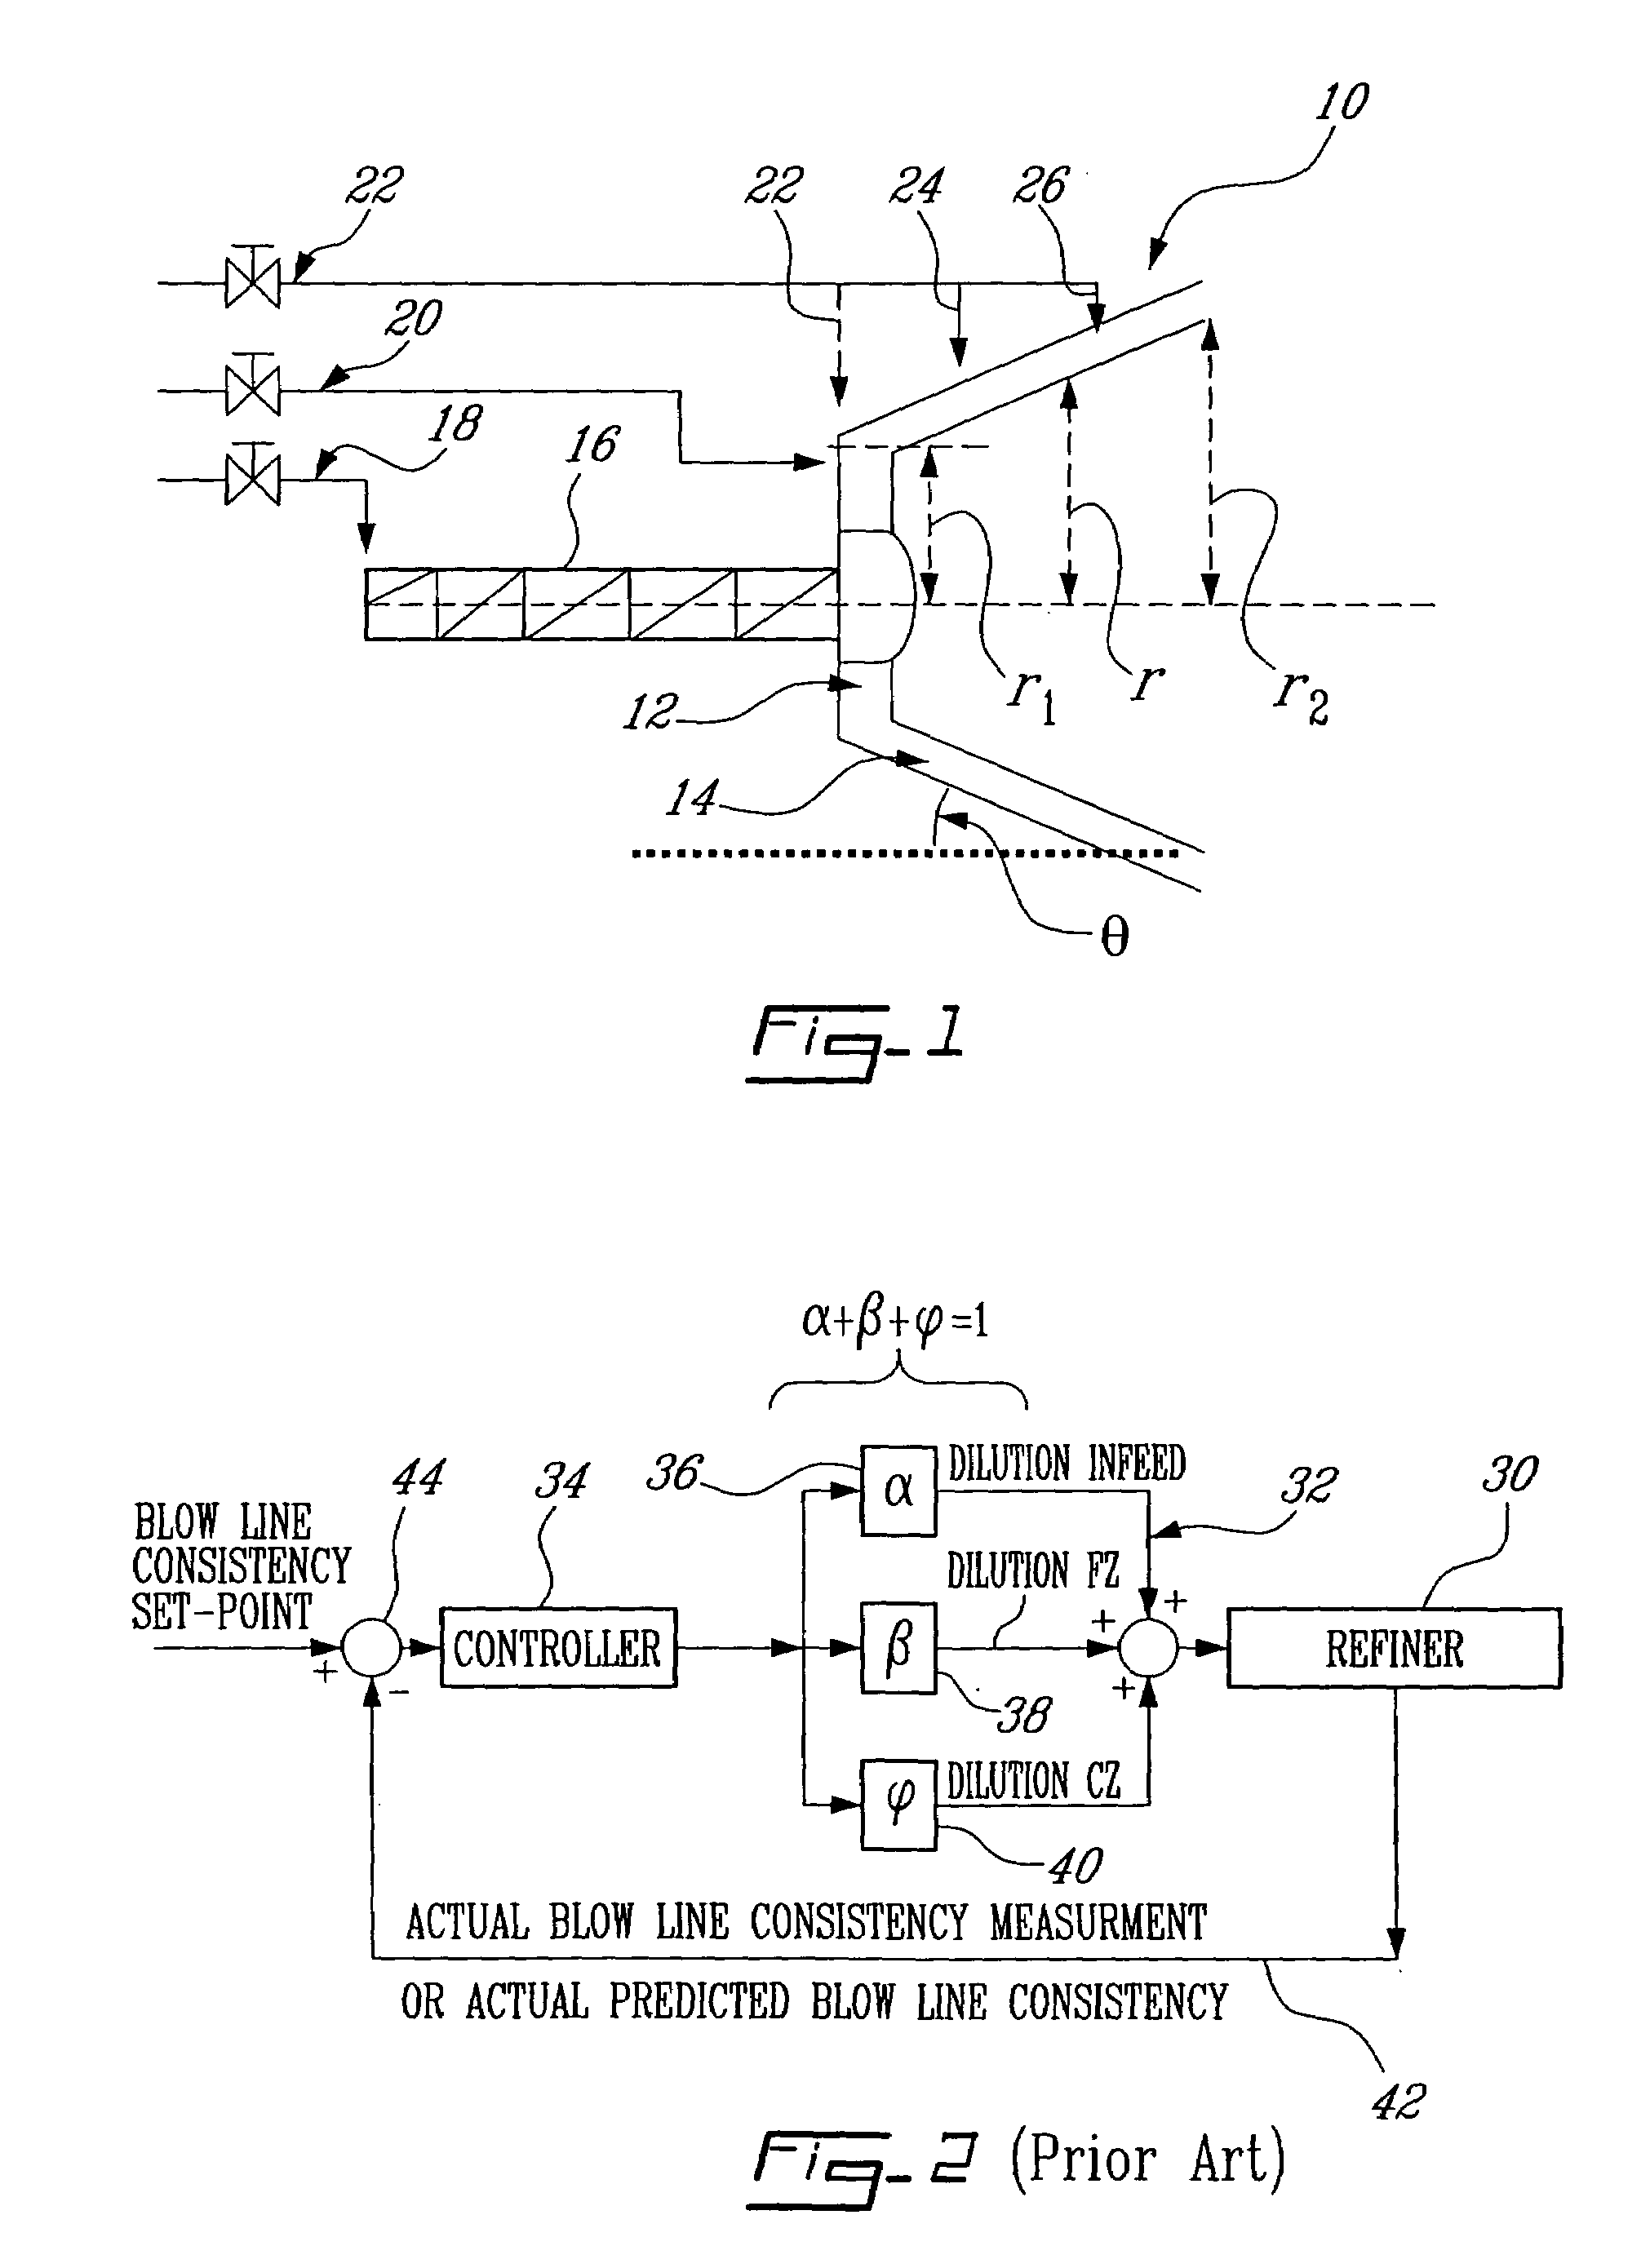 Method of refining wood chips or pulp in a high consistency conical disc refiner